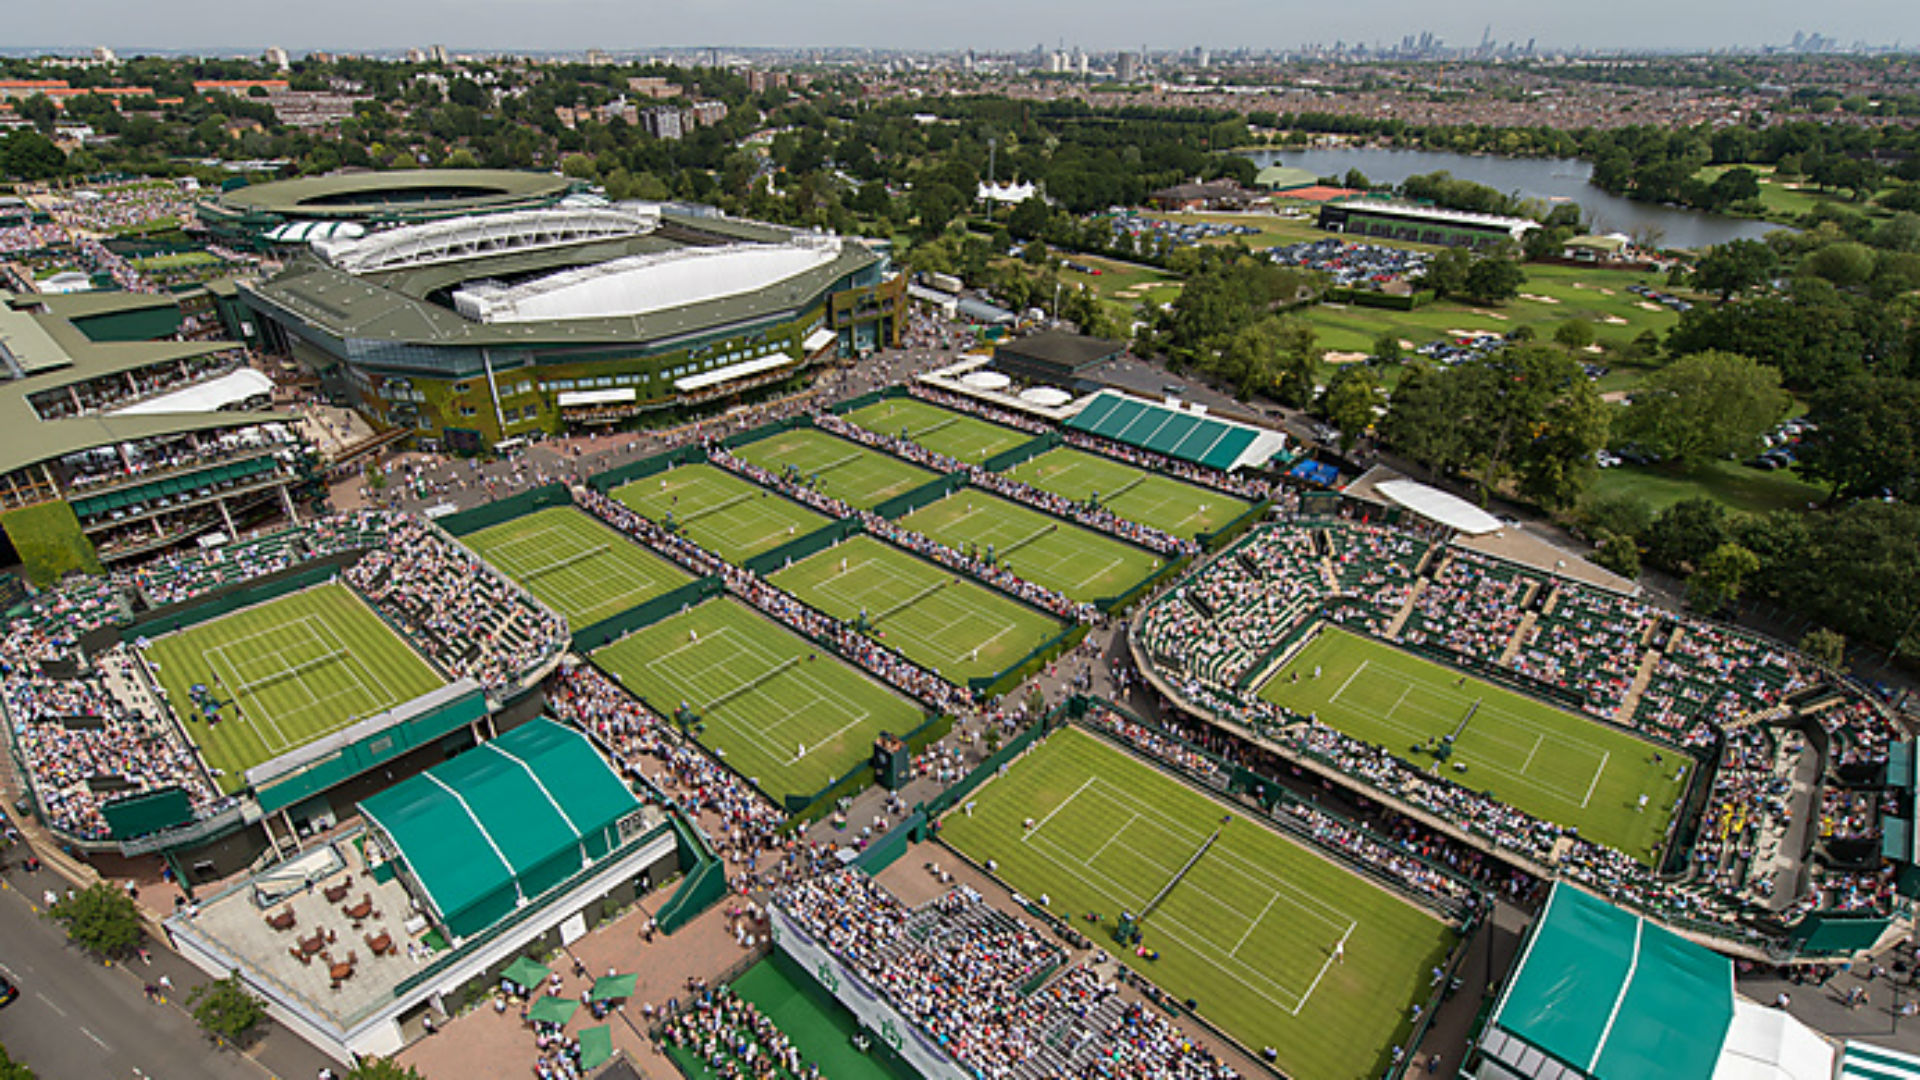 An aerial view of the tennis courts overlooking Wimbledon on day one of The Championships 2015 at The All England Lawn Tennis Club with London's panorama in the background